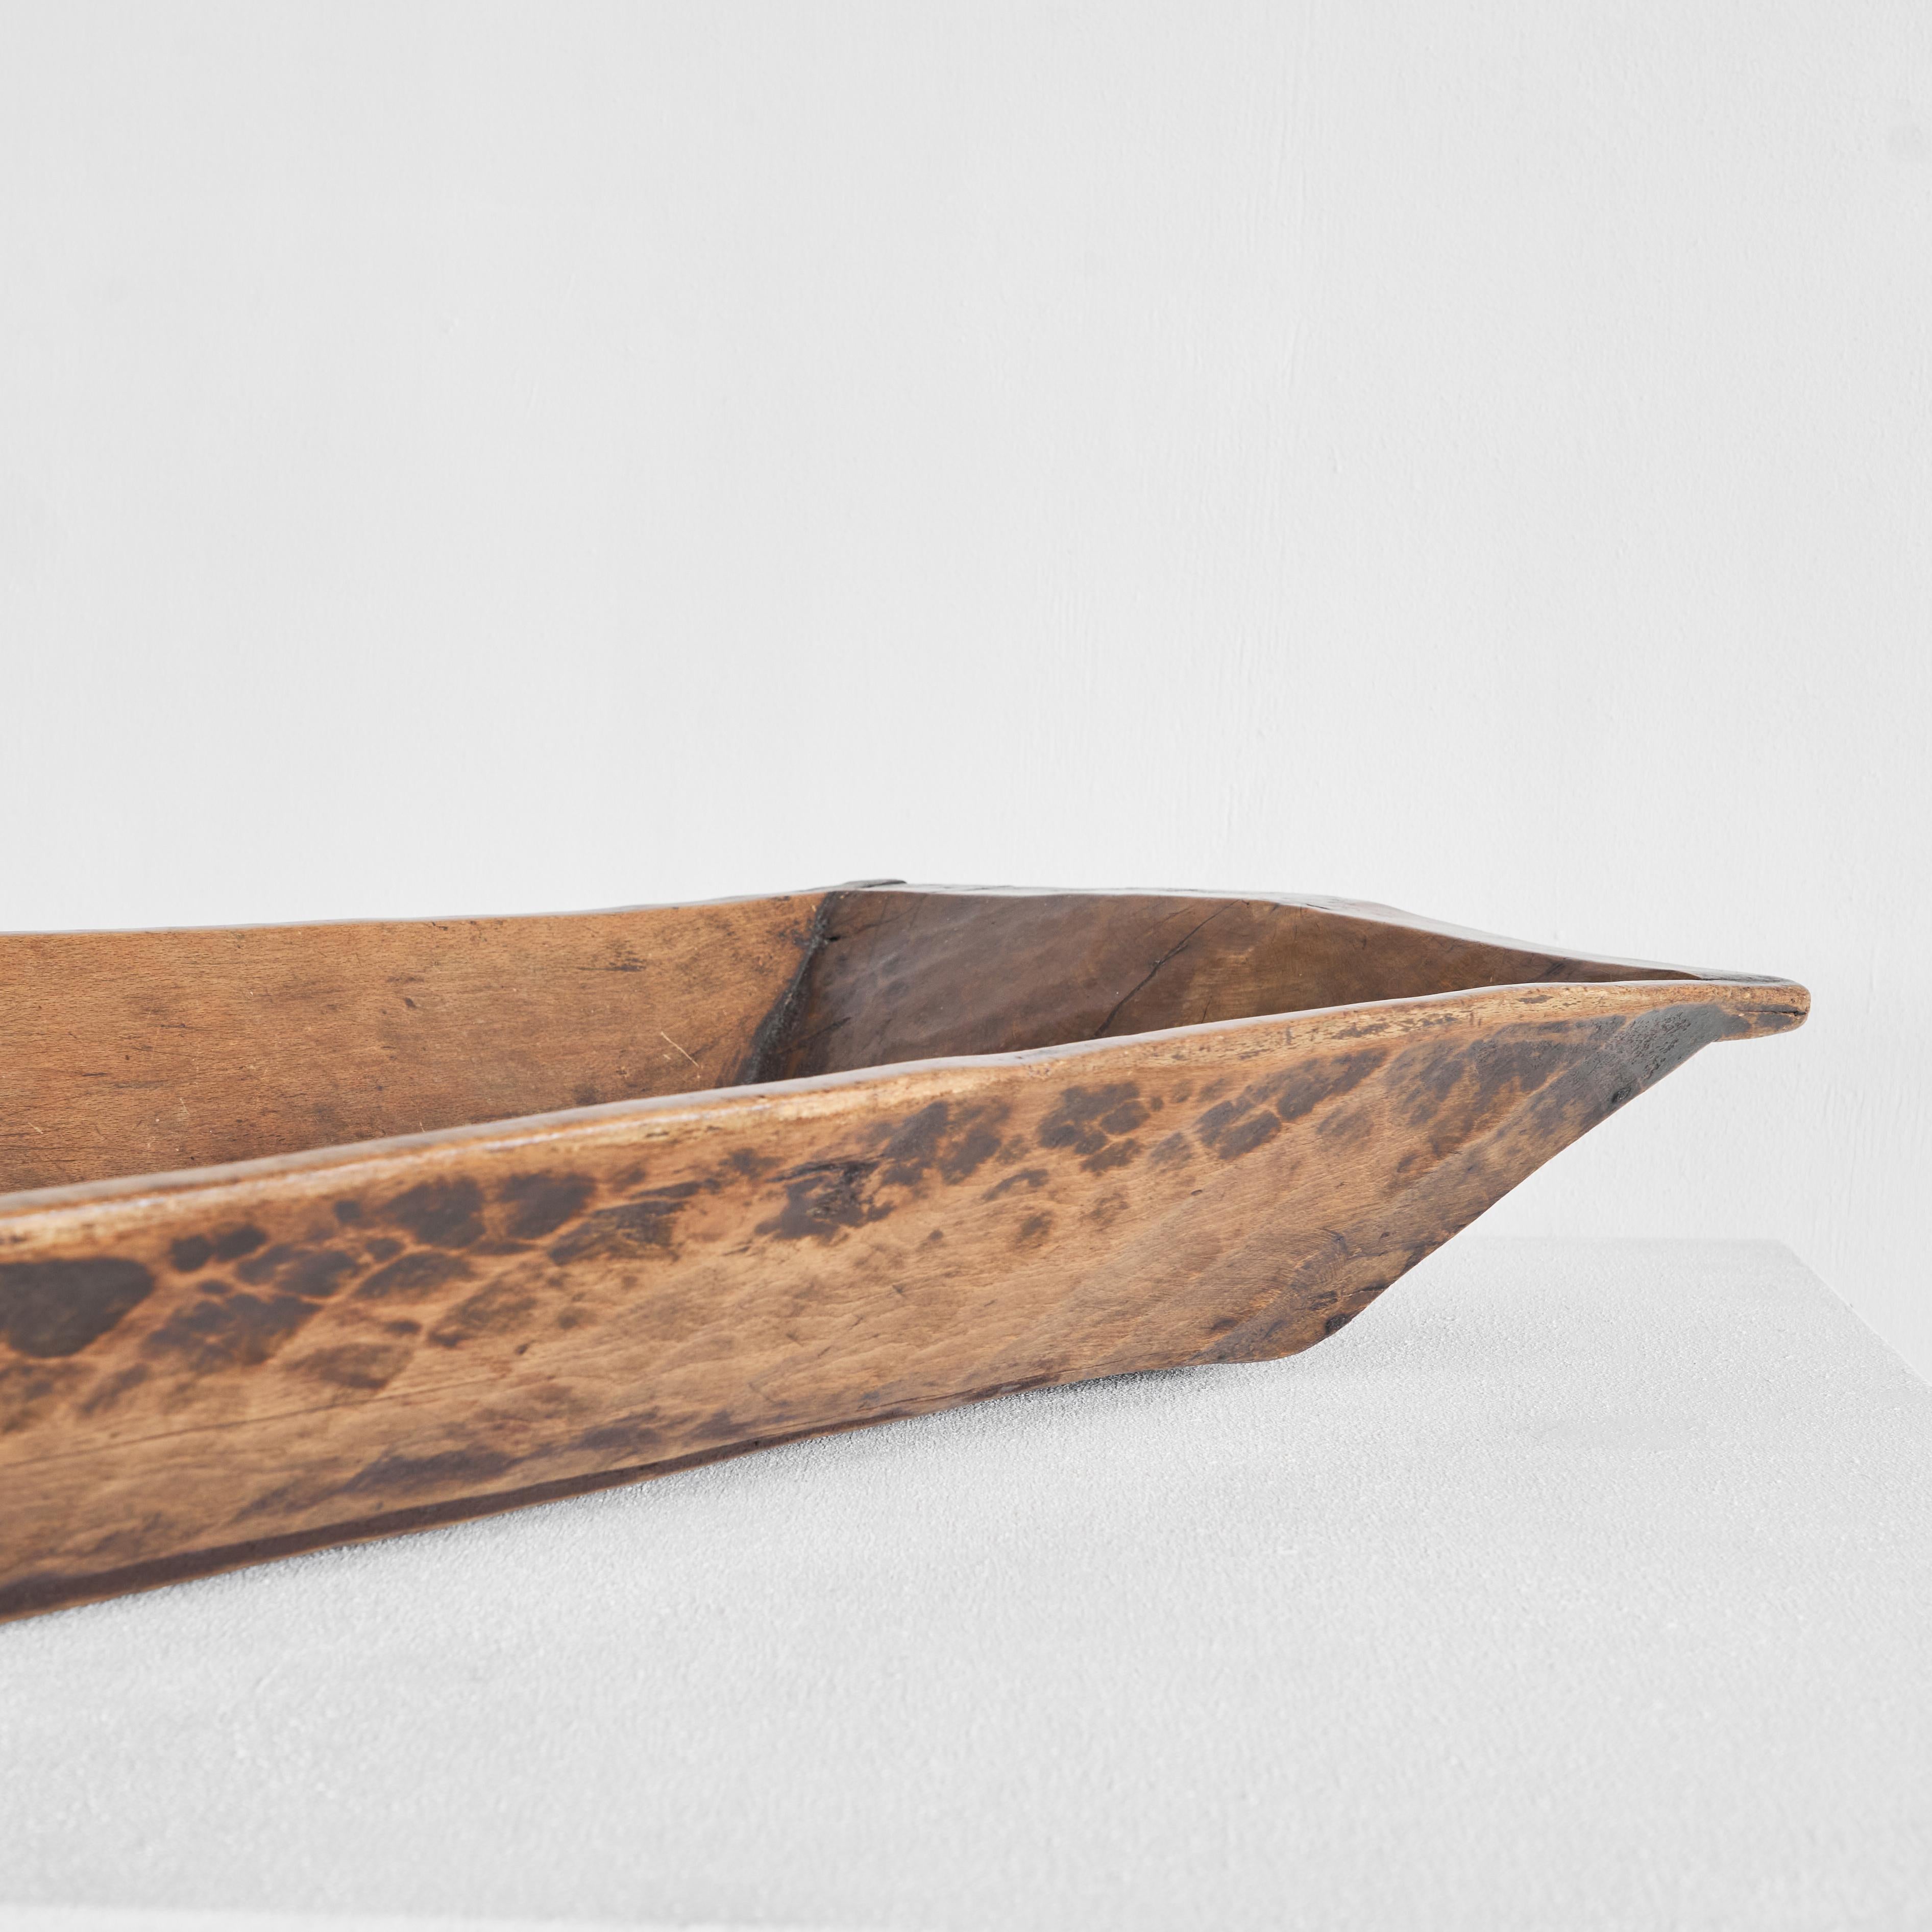 Monumental Antique Hand Carved Wooden Trough or Bowl Wabi Sabi, 19th Century For Sale 2